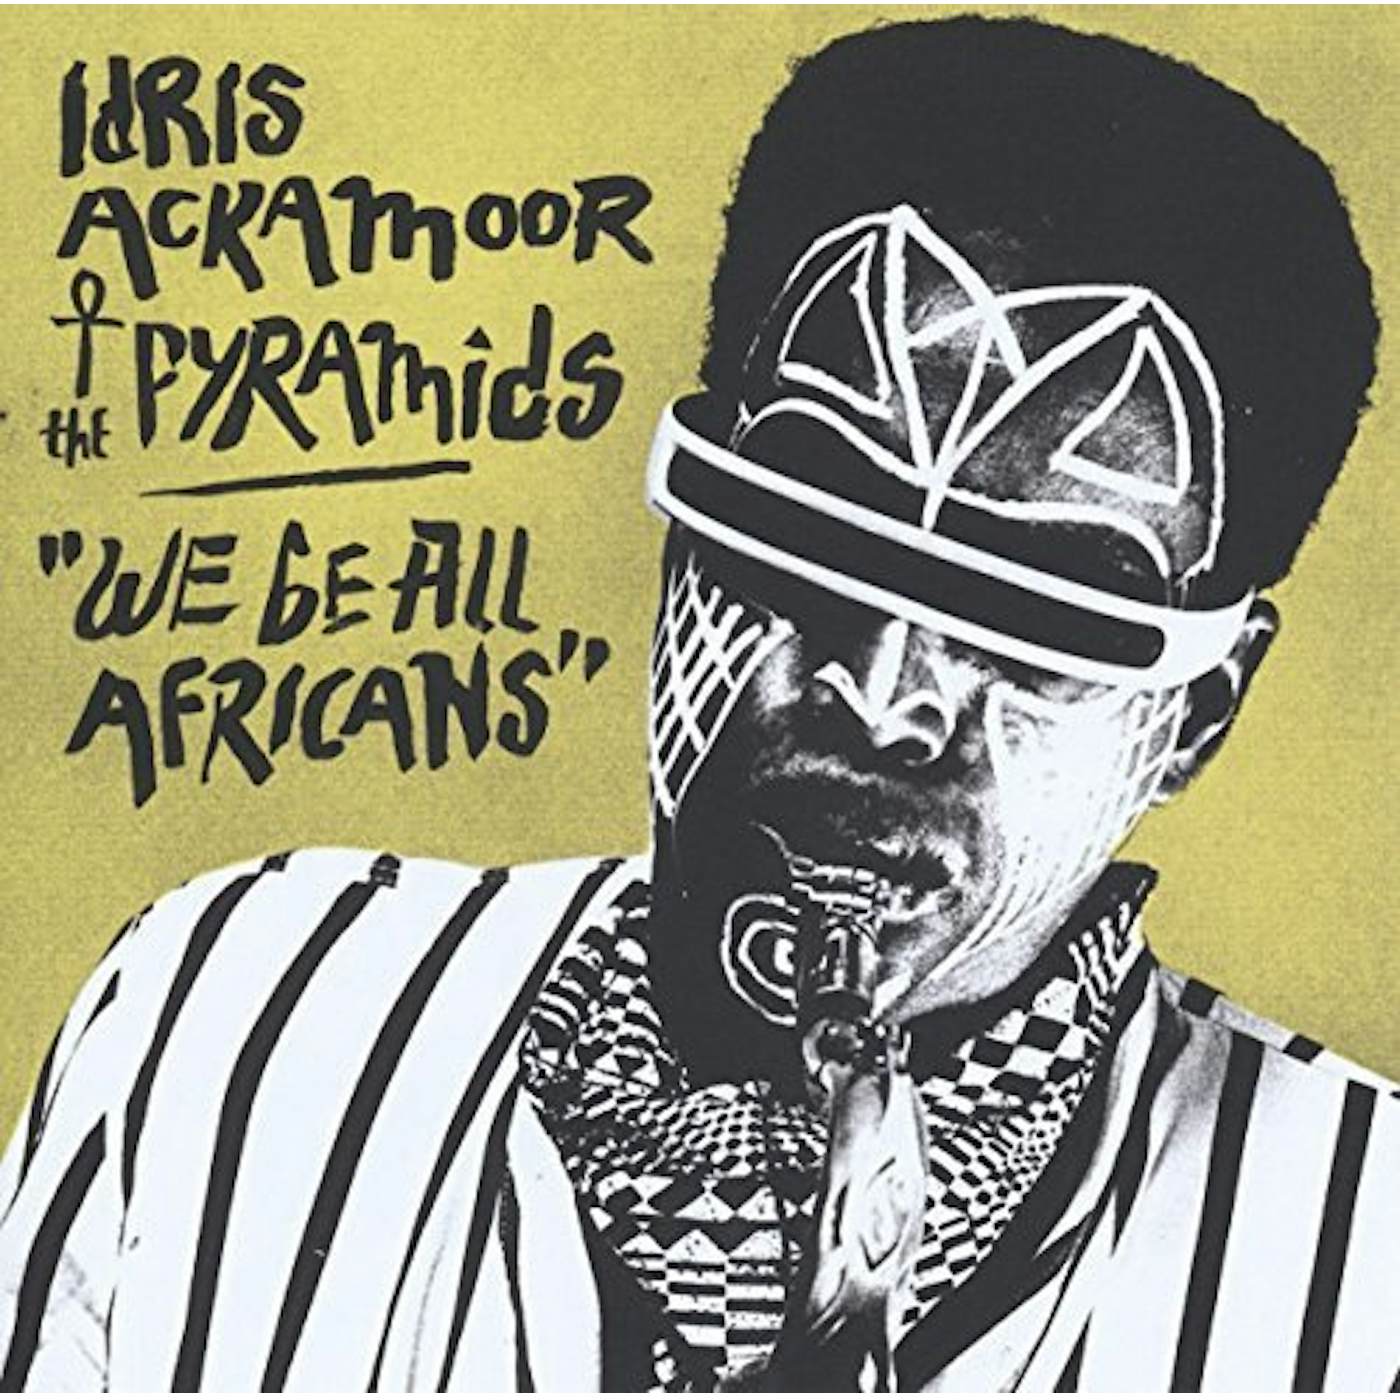 Idris Ackamoor & The Pyramids We Be All Africans Vinyl Record